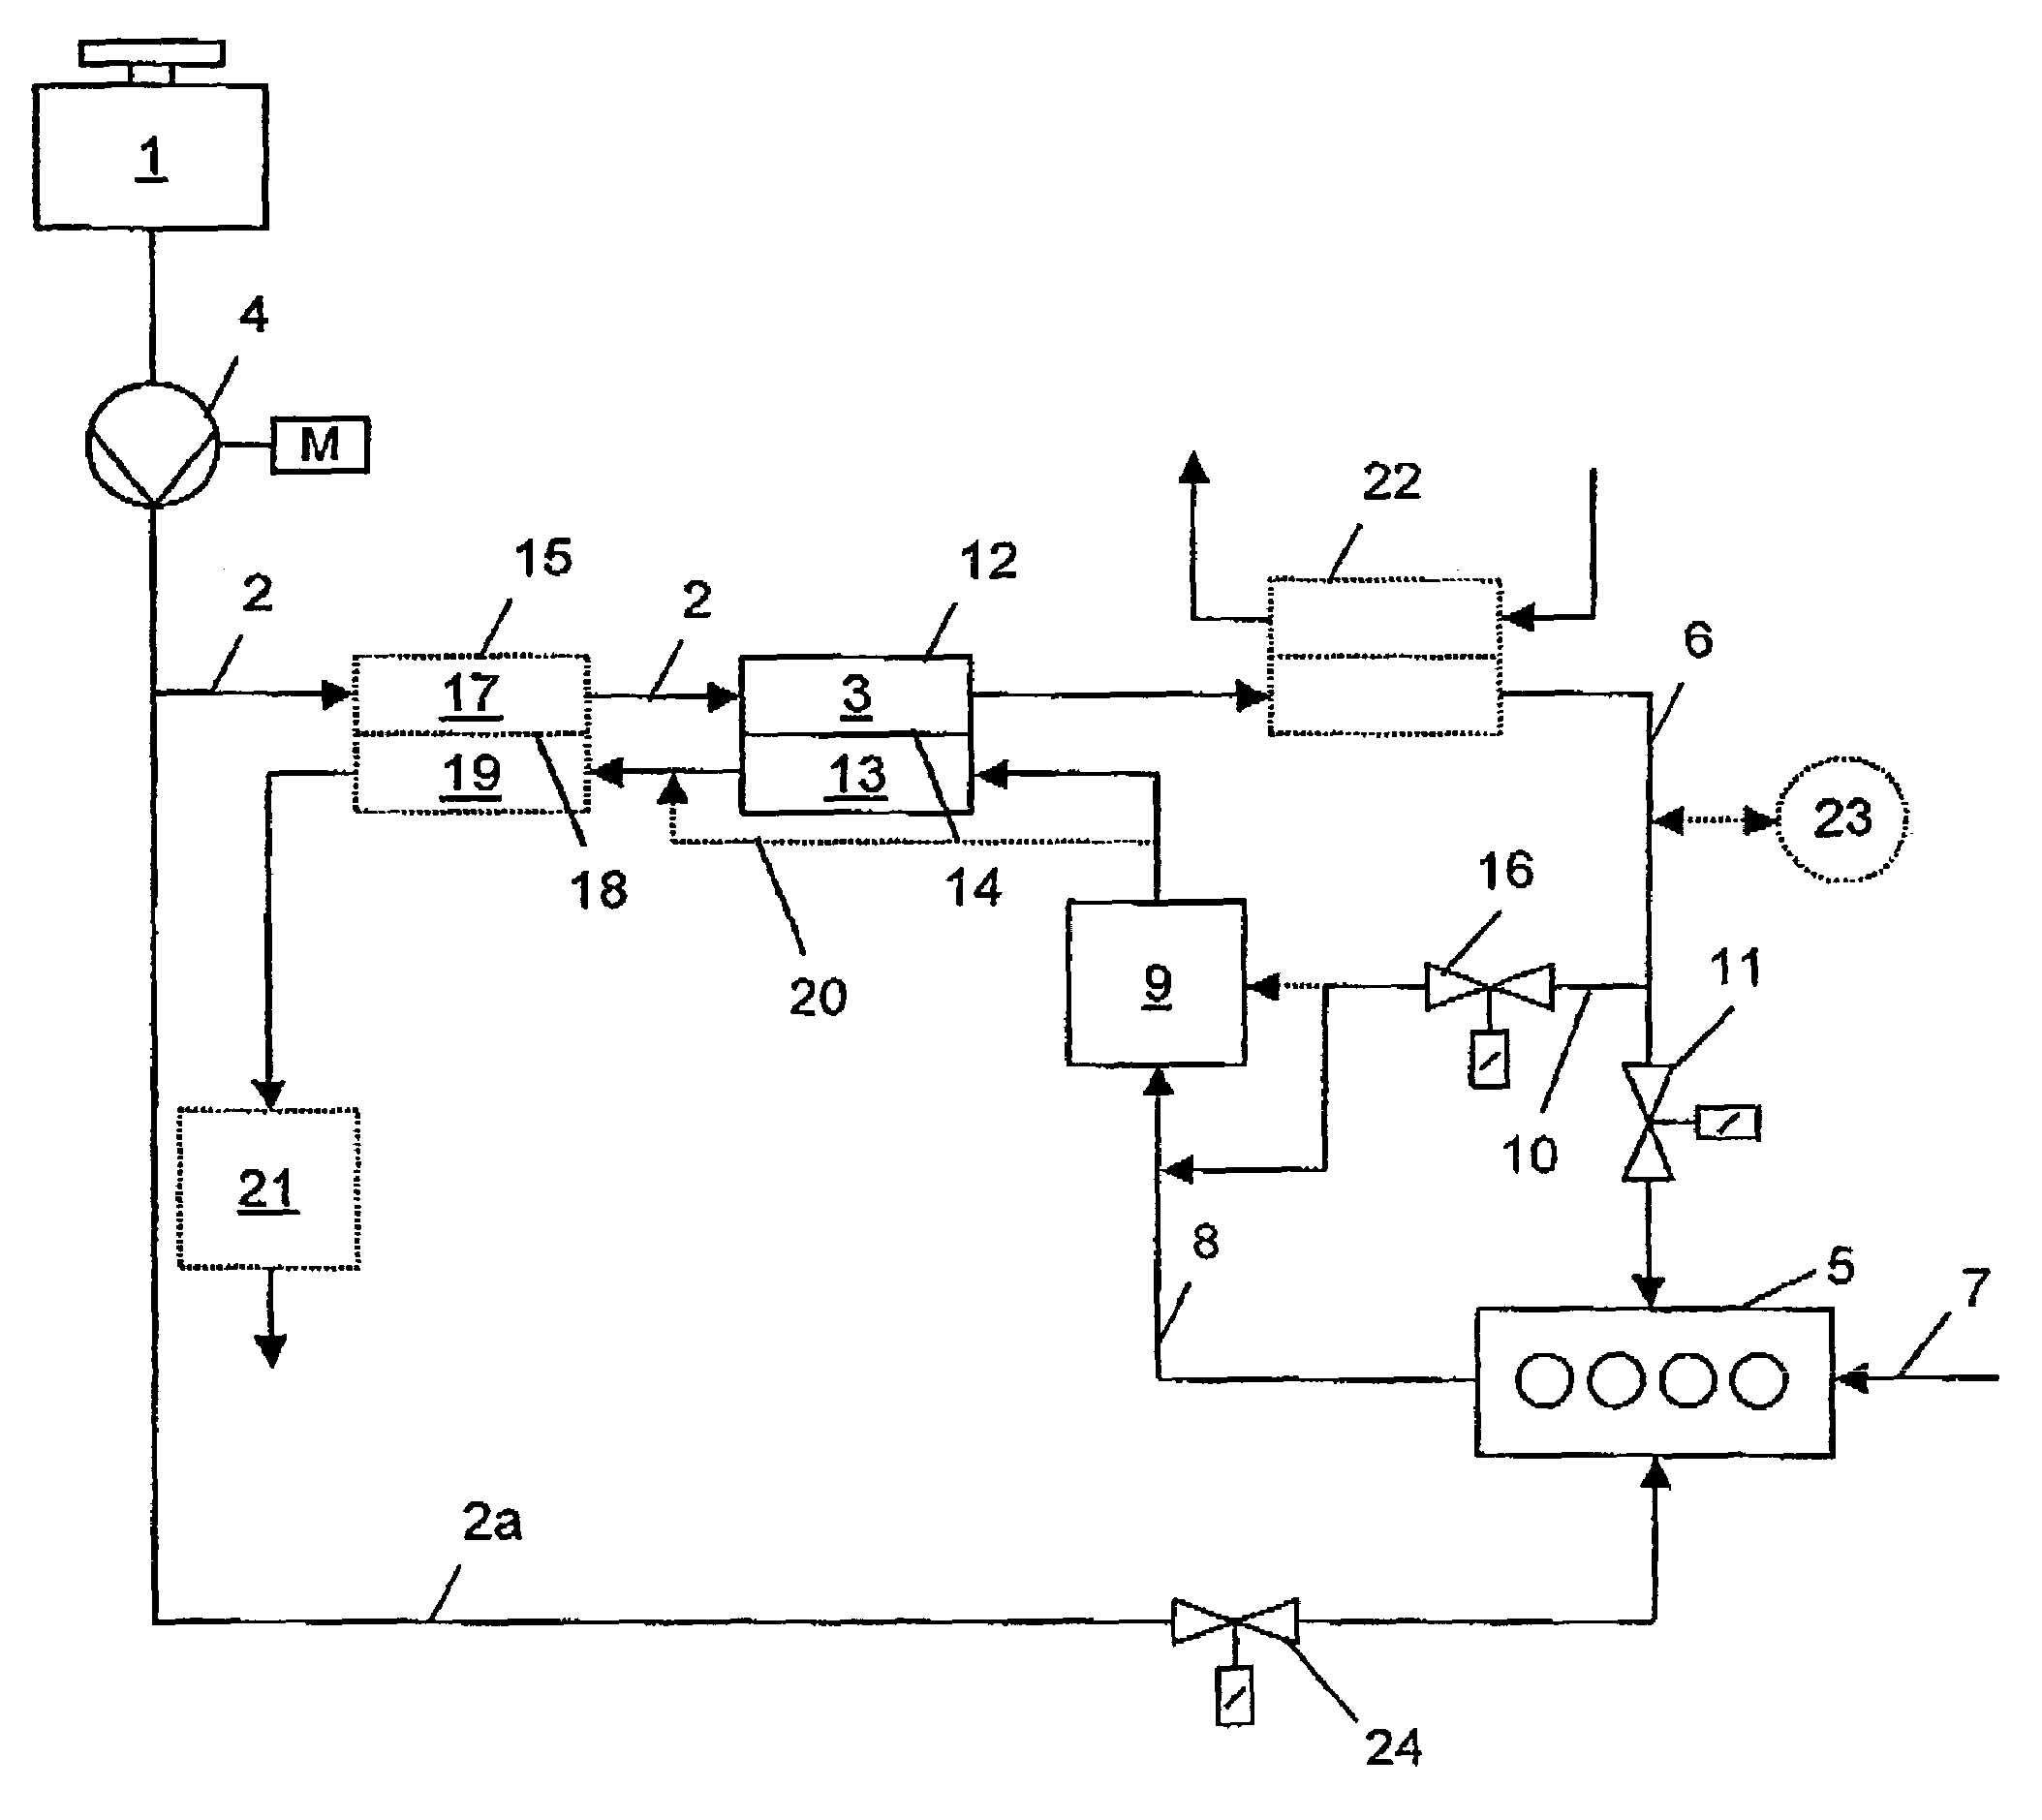 Internal combustion engine fuel supply system